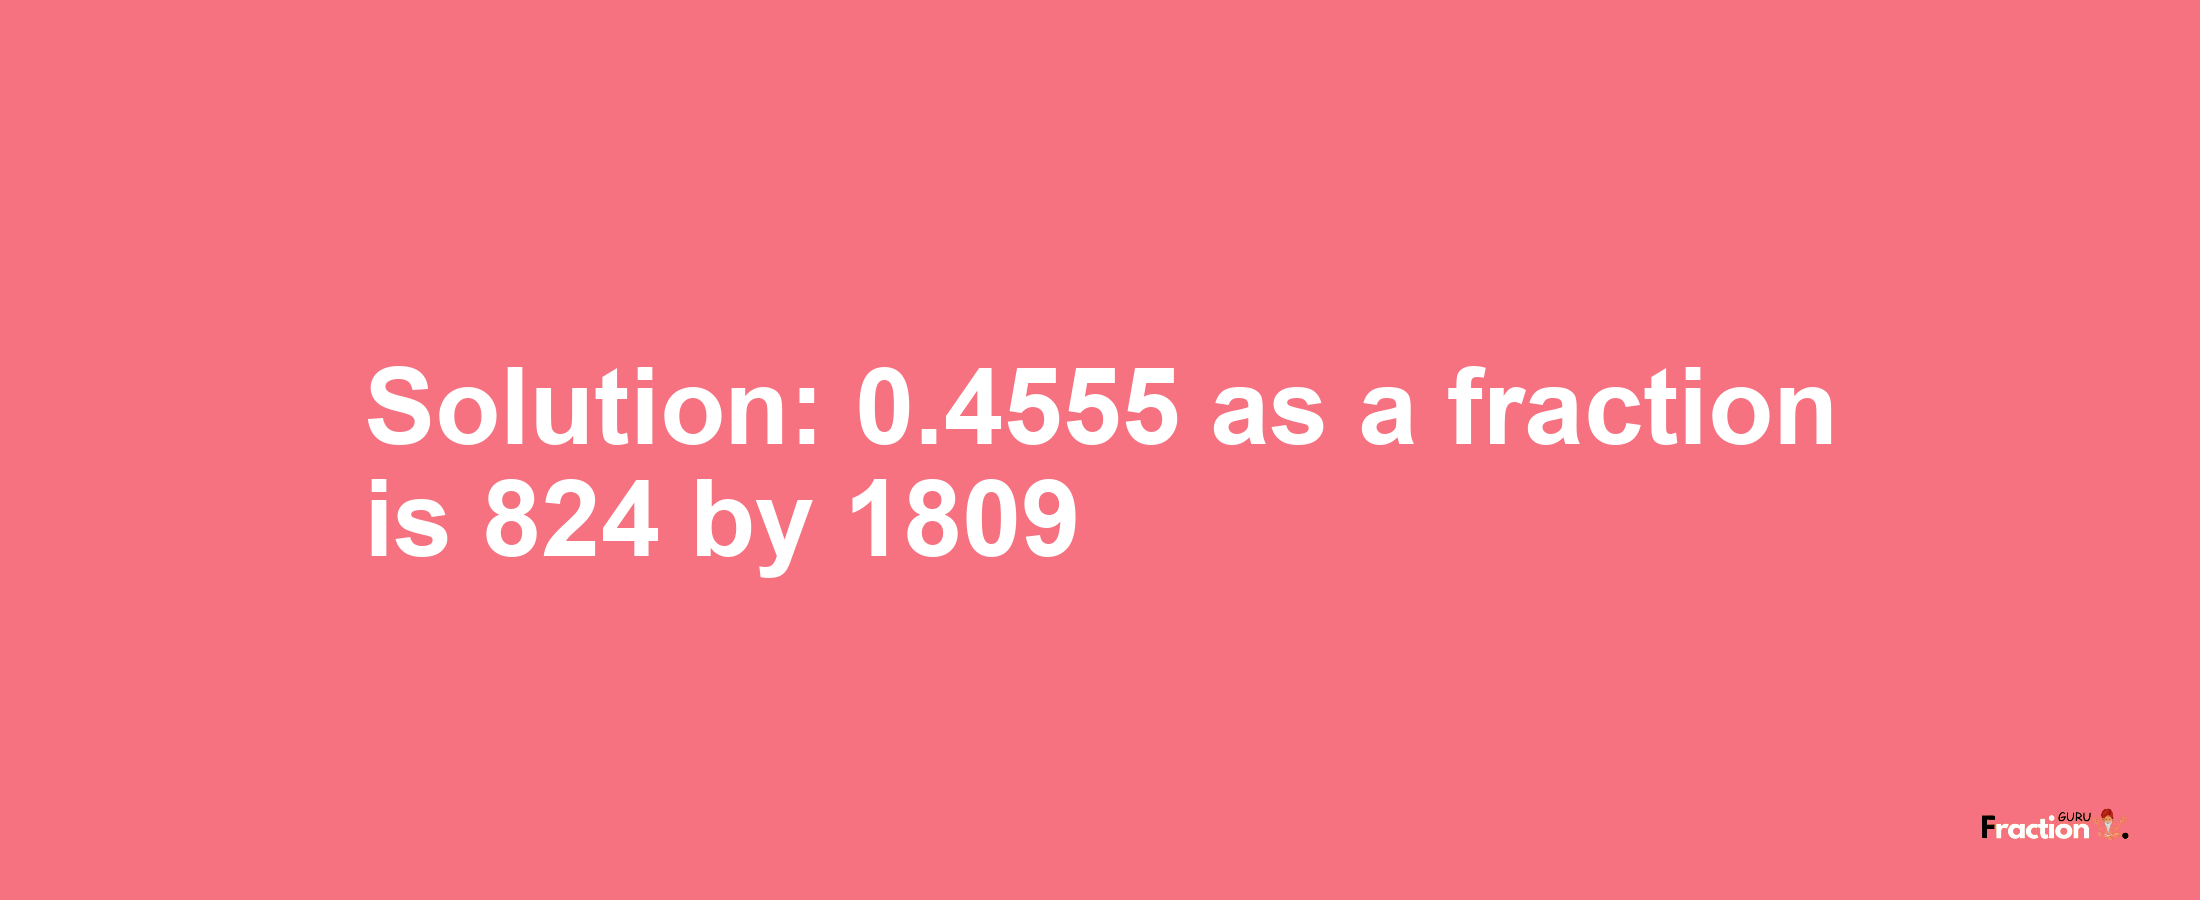 Solution:0.4555 as a fraction is 824/1809